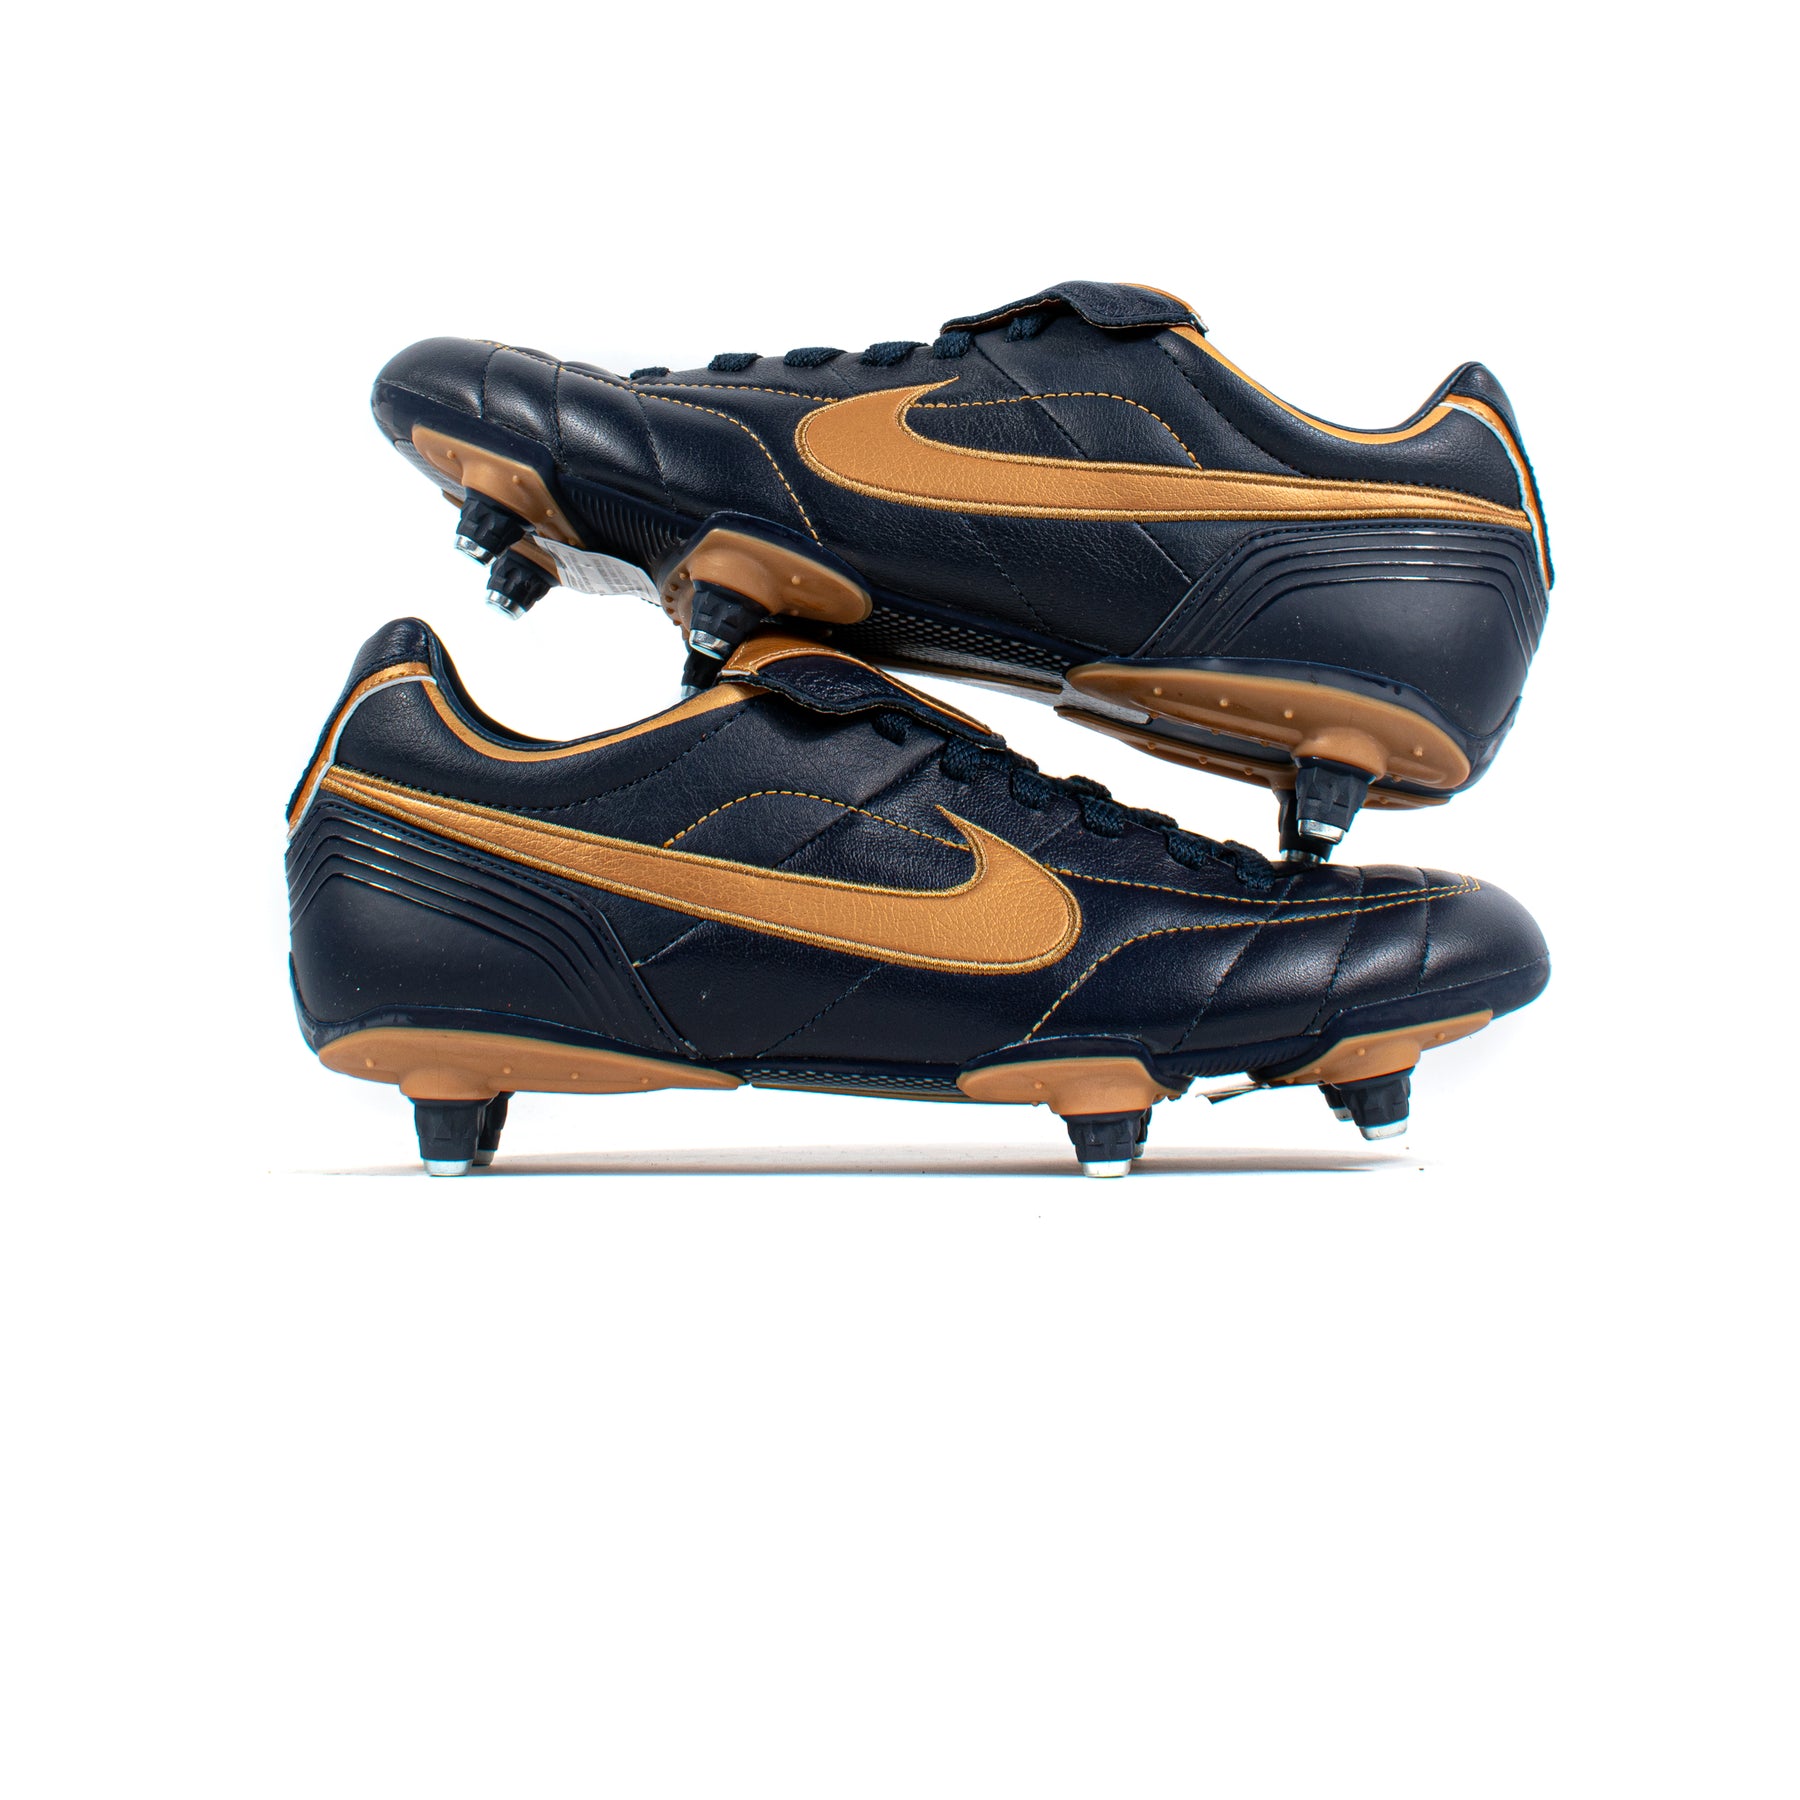 Tiempo Air Legend Navy Gold SG – Classic Soccer Cleats